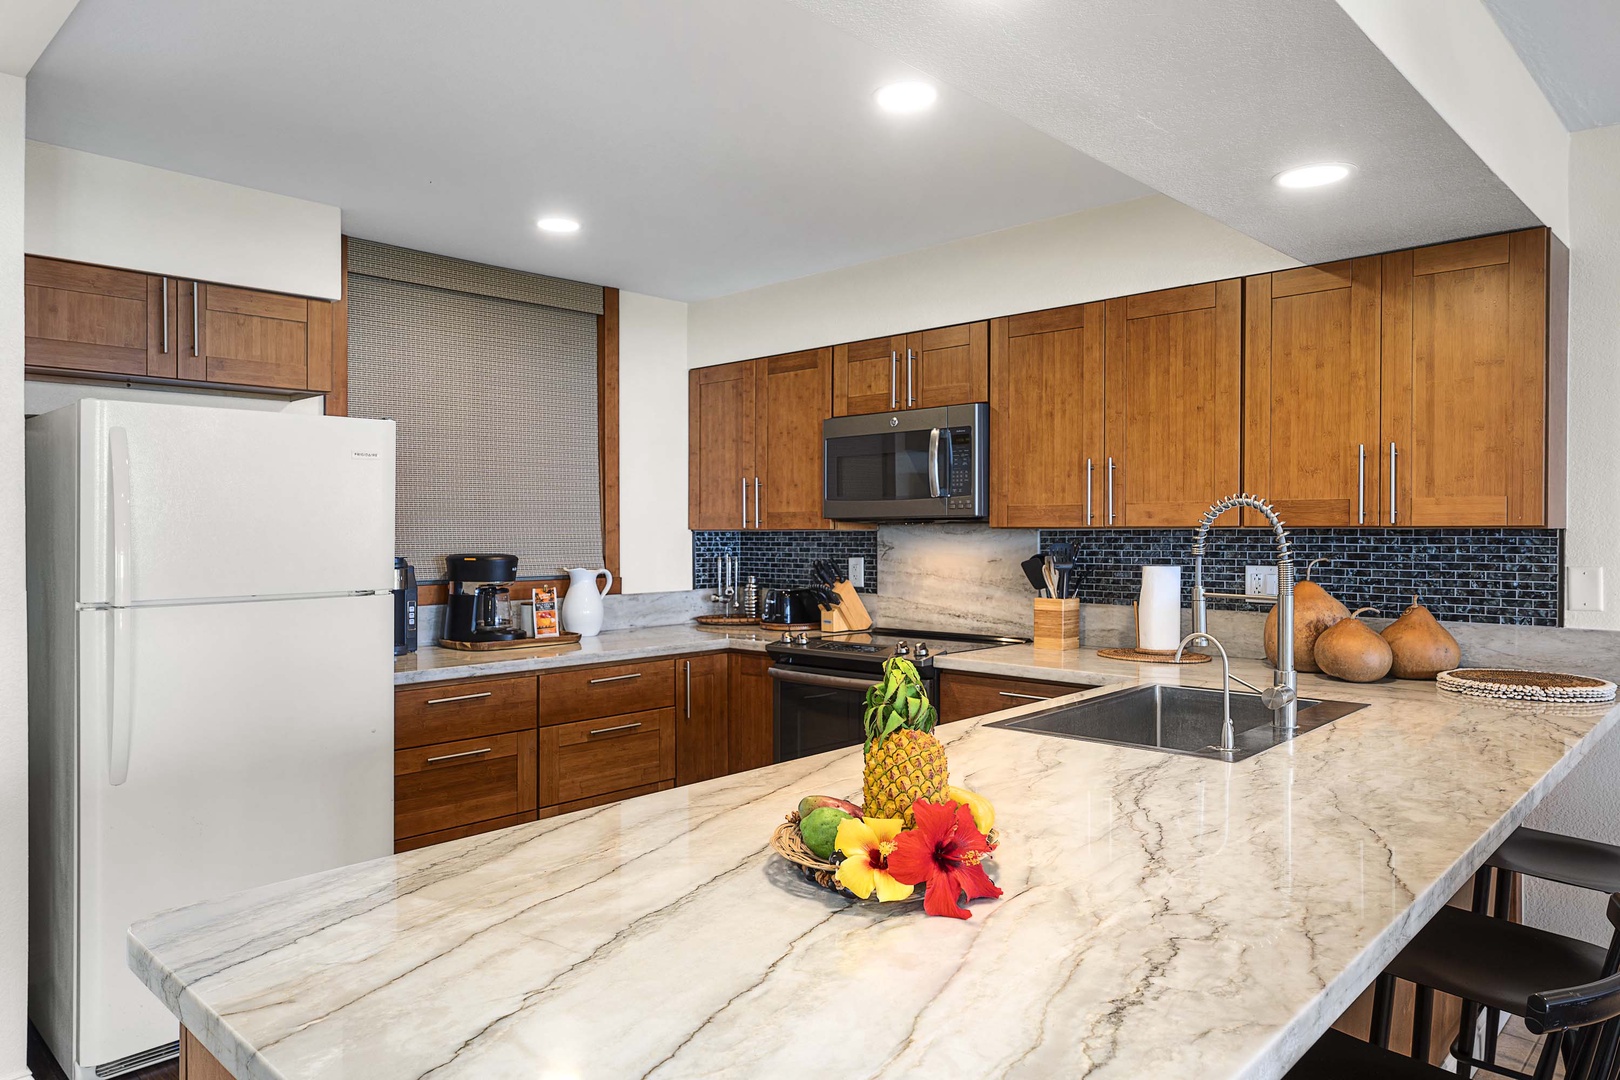 Kailua Kona Vacation Rentals, Keauhou Kona Surf & Racquet 2101 - Wide counter space, enough for a nice and delightful meal prep.